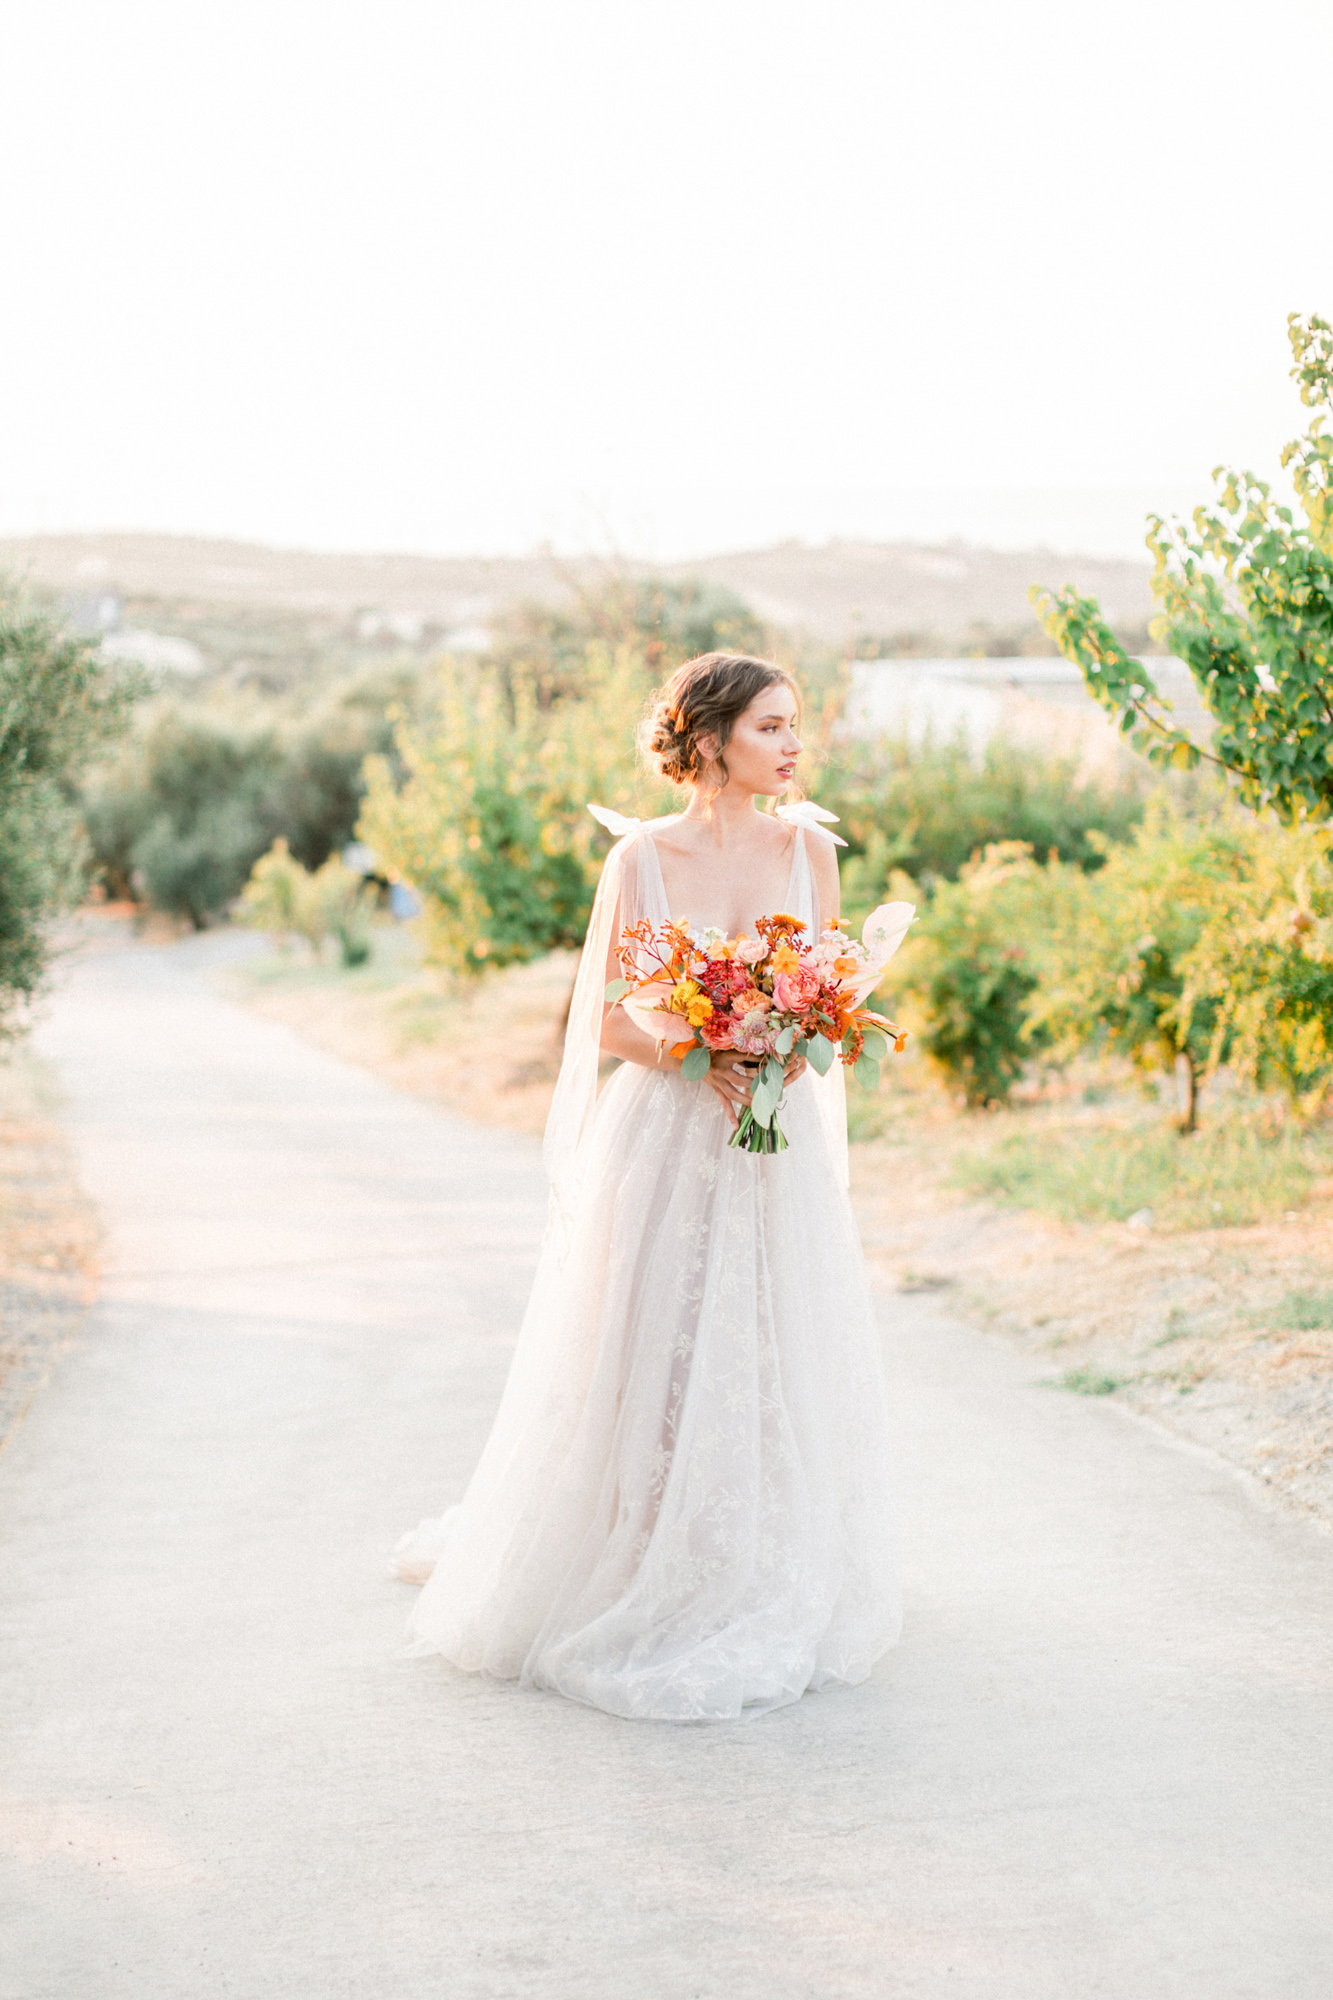 Stunning modern bride holding flowers at a sunset wedding editorial in Grecotel Agreco Farms Crete Greece as published on Ruffled blog.